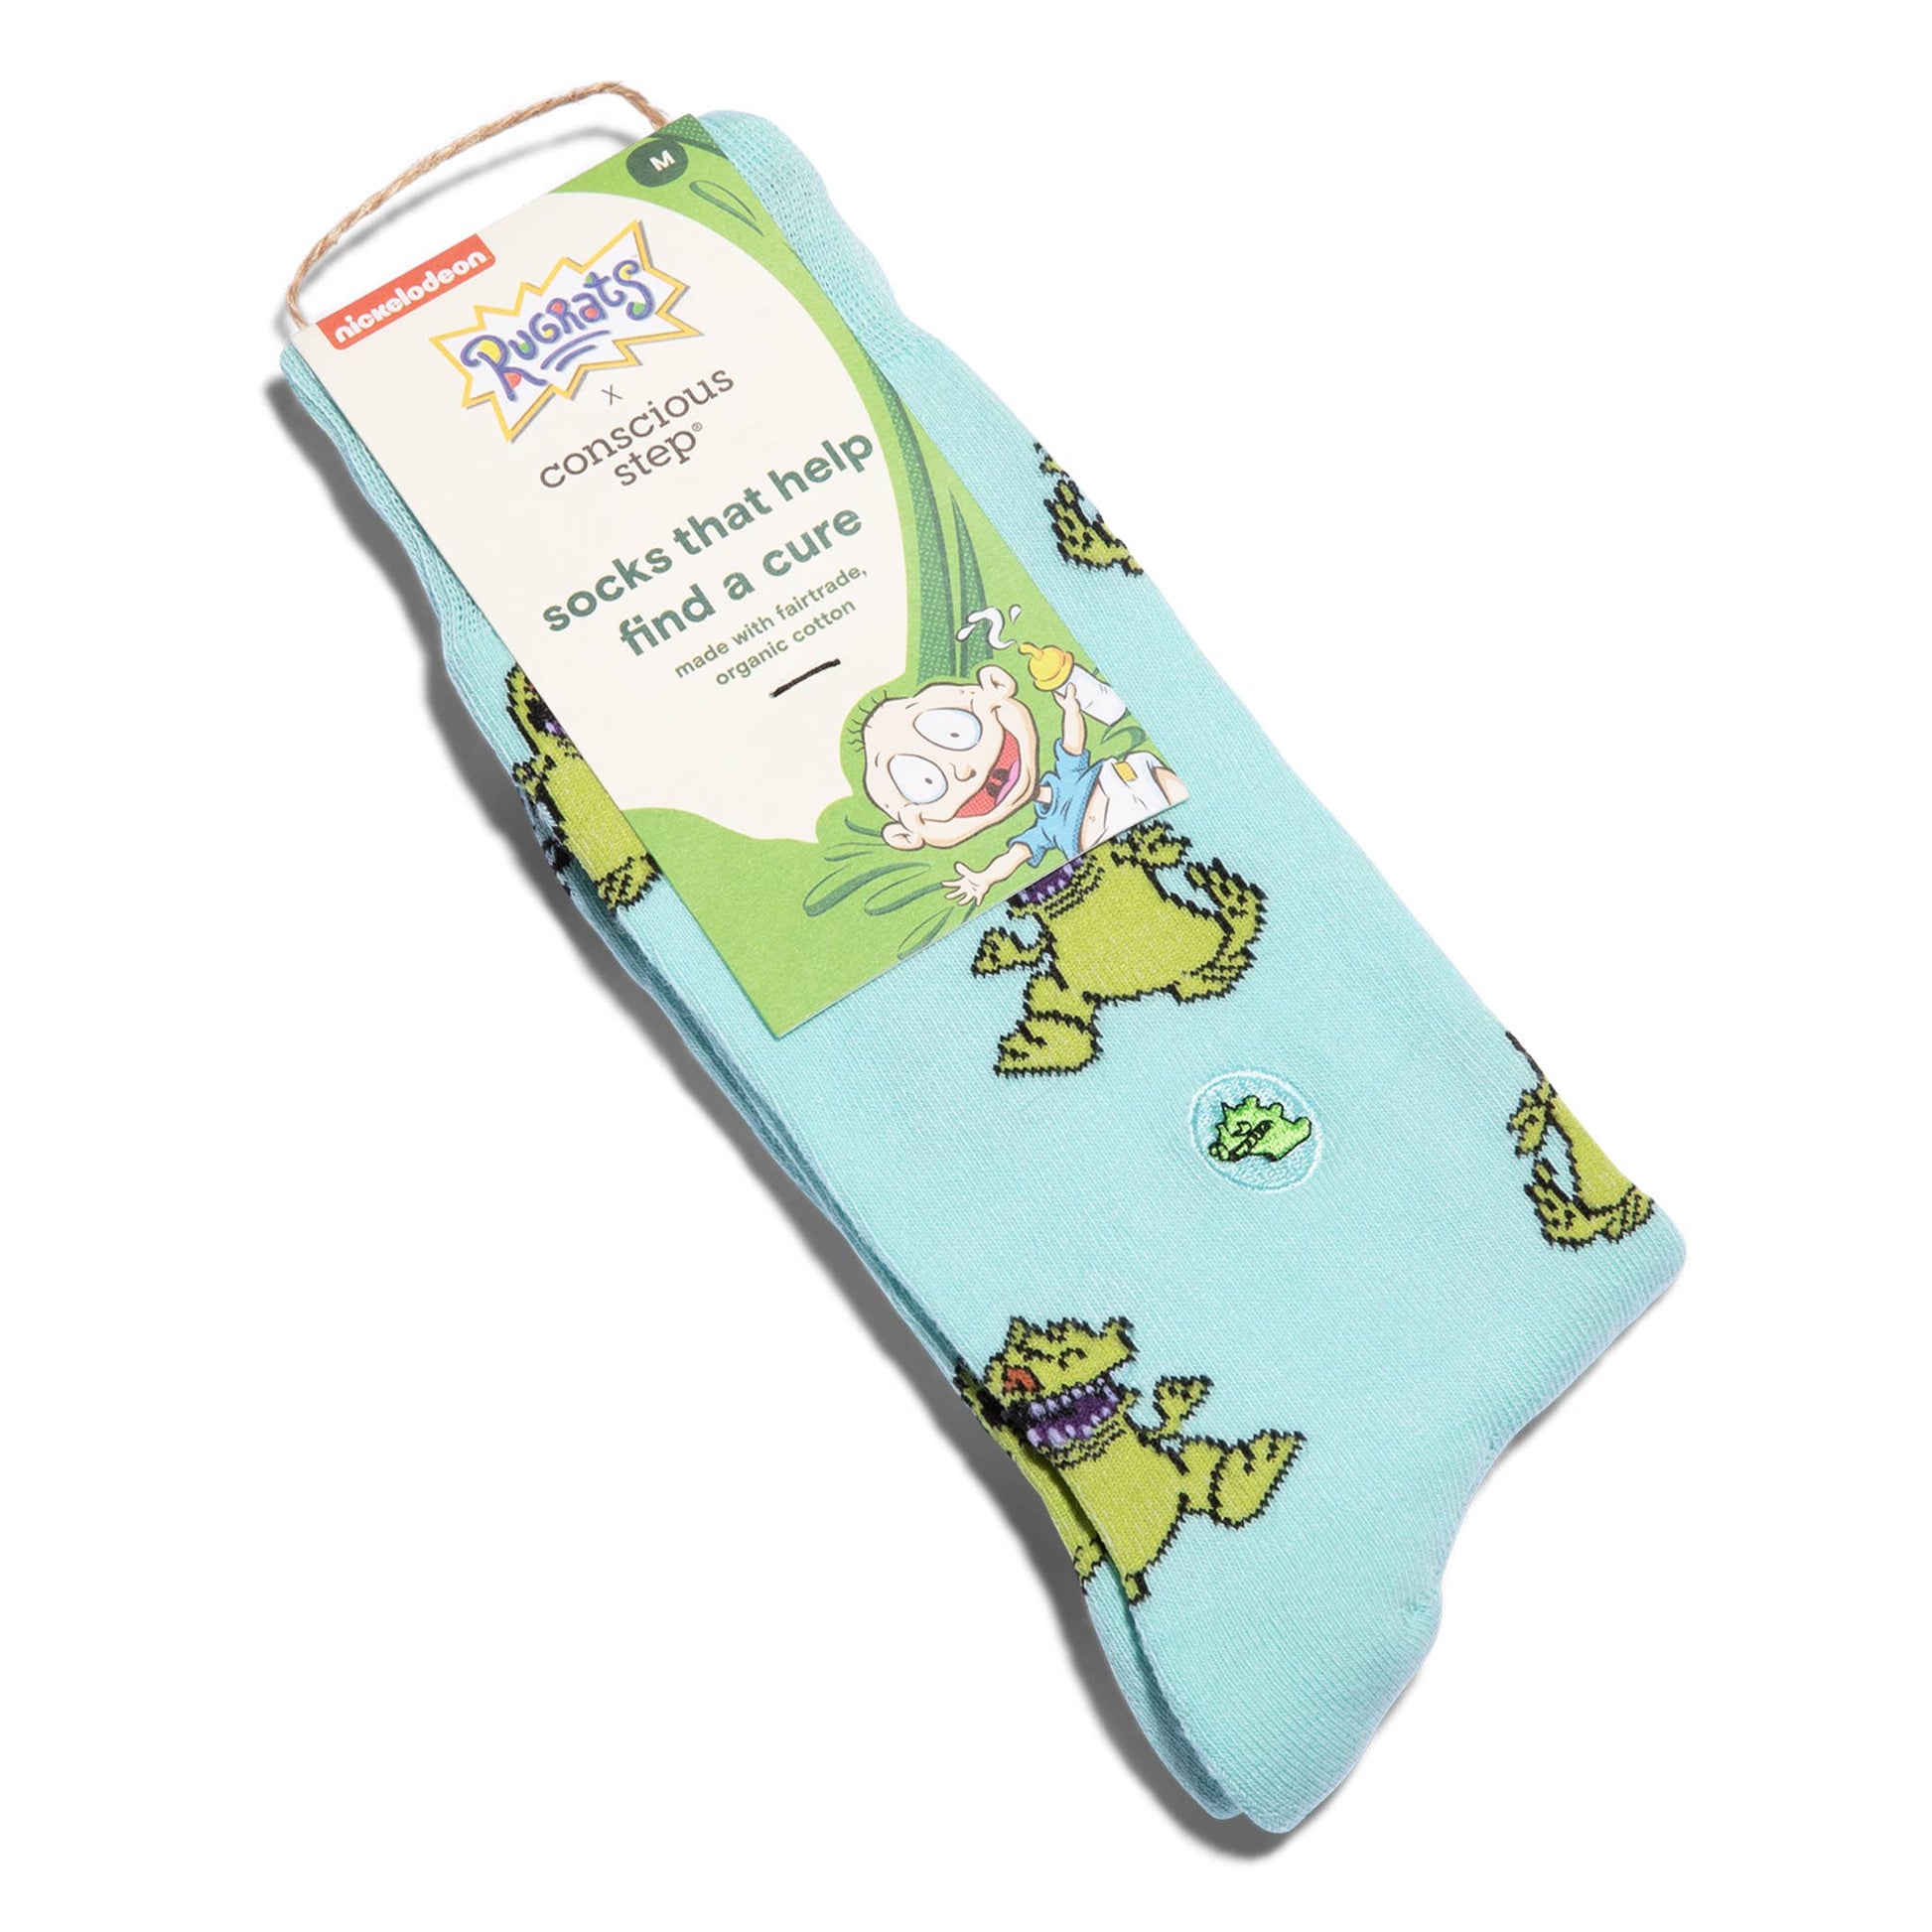 Conscious Step - Rugrats Socks that Find a Cure (Blue Reptars)  Conscious Step Medium  -better made easy-eco-friendly-sustainable-gifting